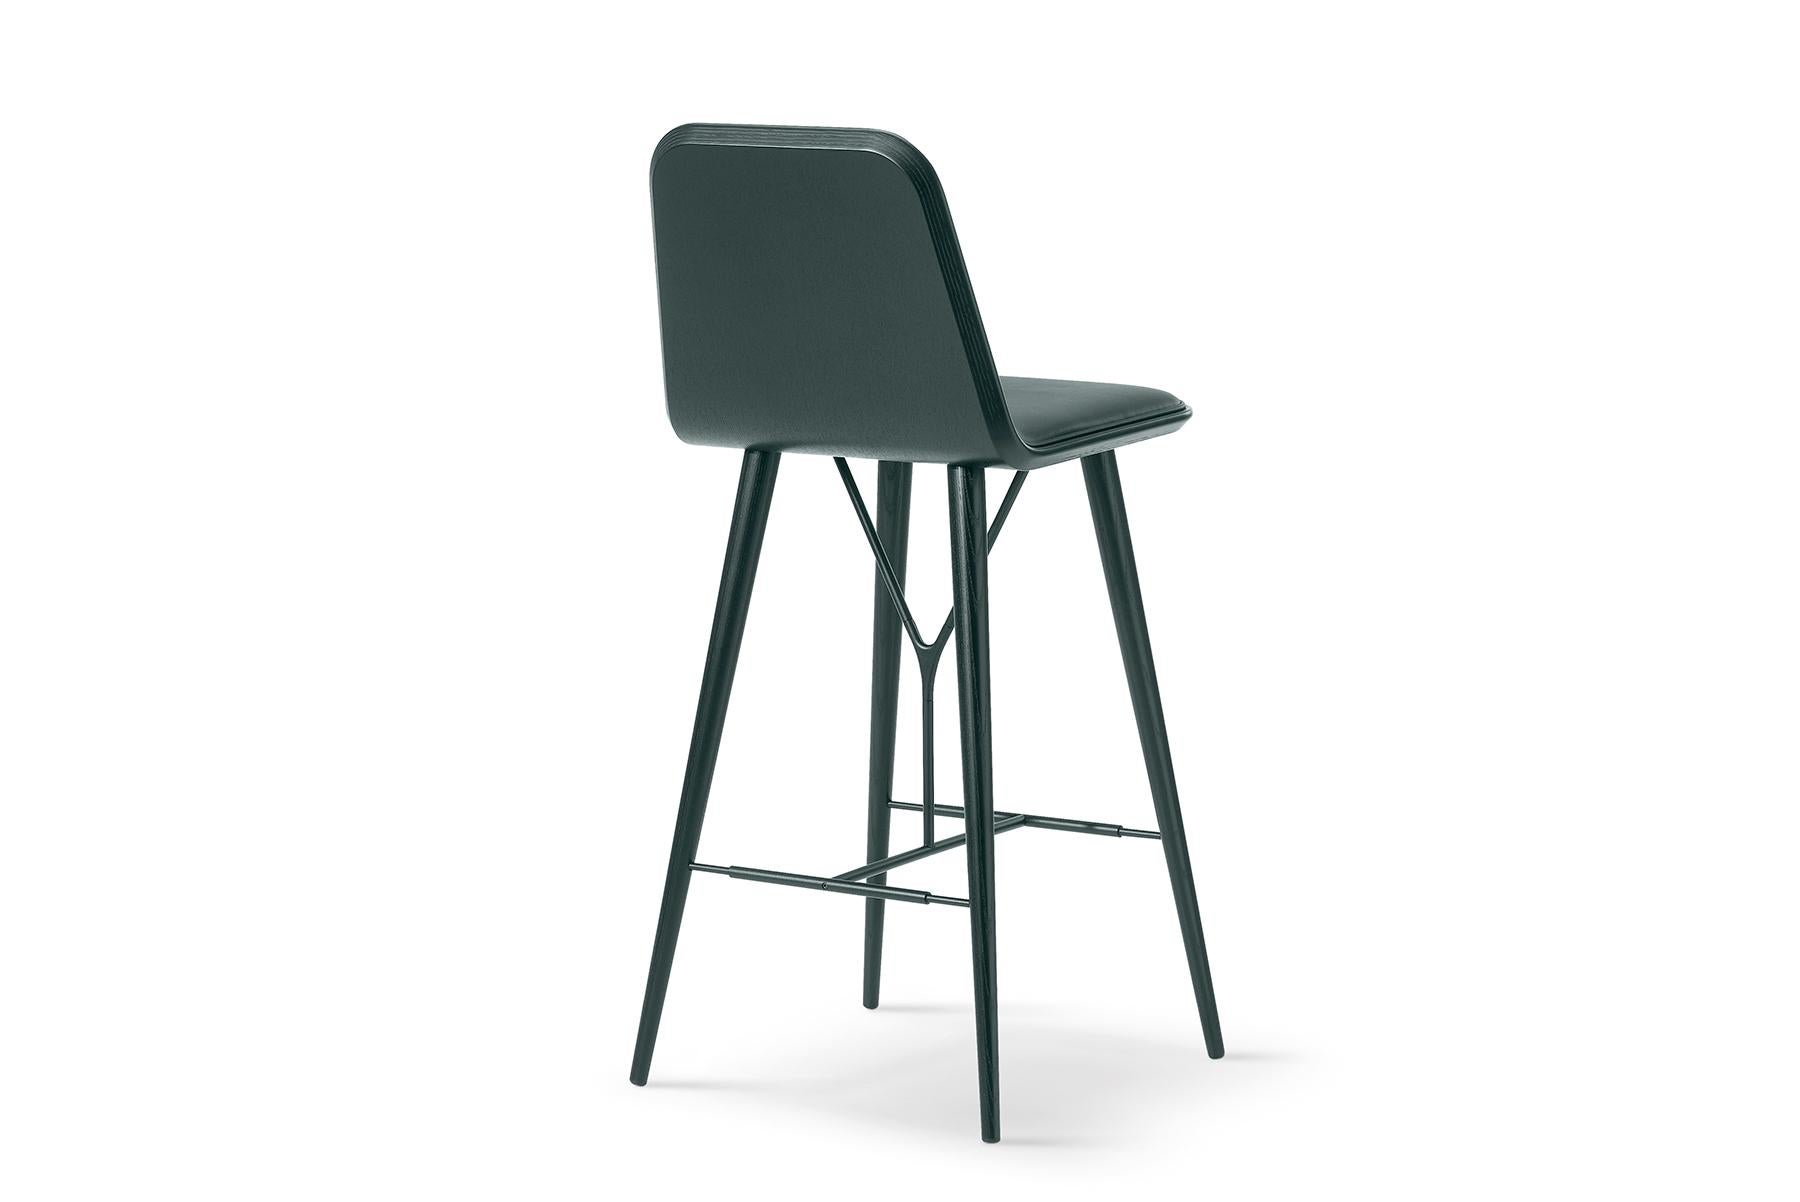 Space Copenhagen spine barstool (w/ back) spine is the fusion of Fredericia’s craft traditions and Space Copenhagen’s dynamic visual language that uses both classic motifs and unorthodox details. Spine barstool is a high dining chair ideal for